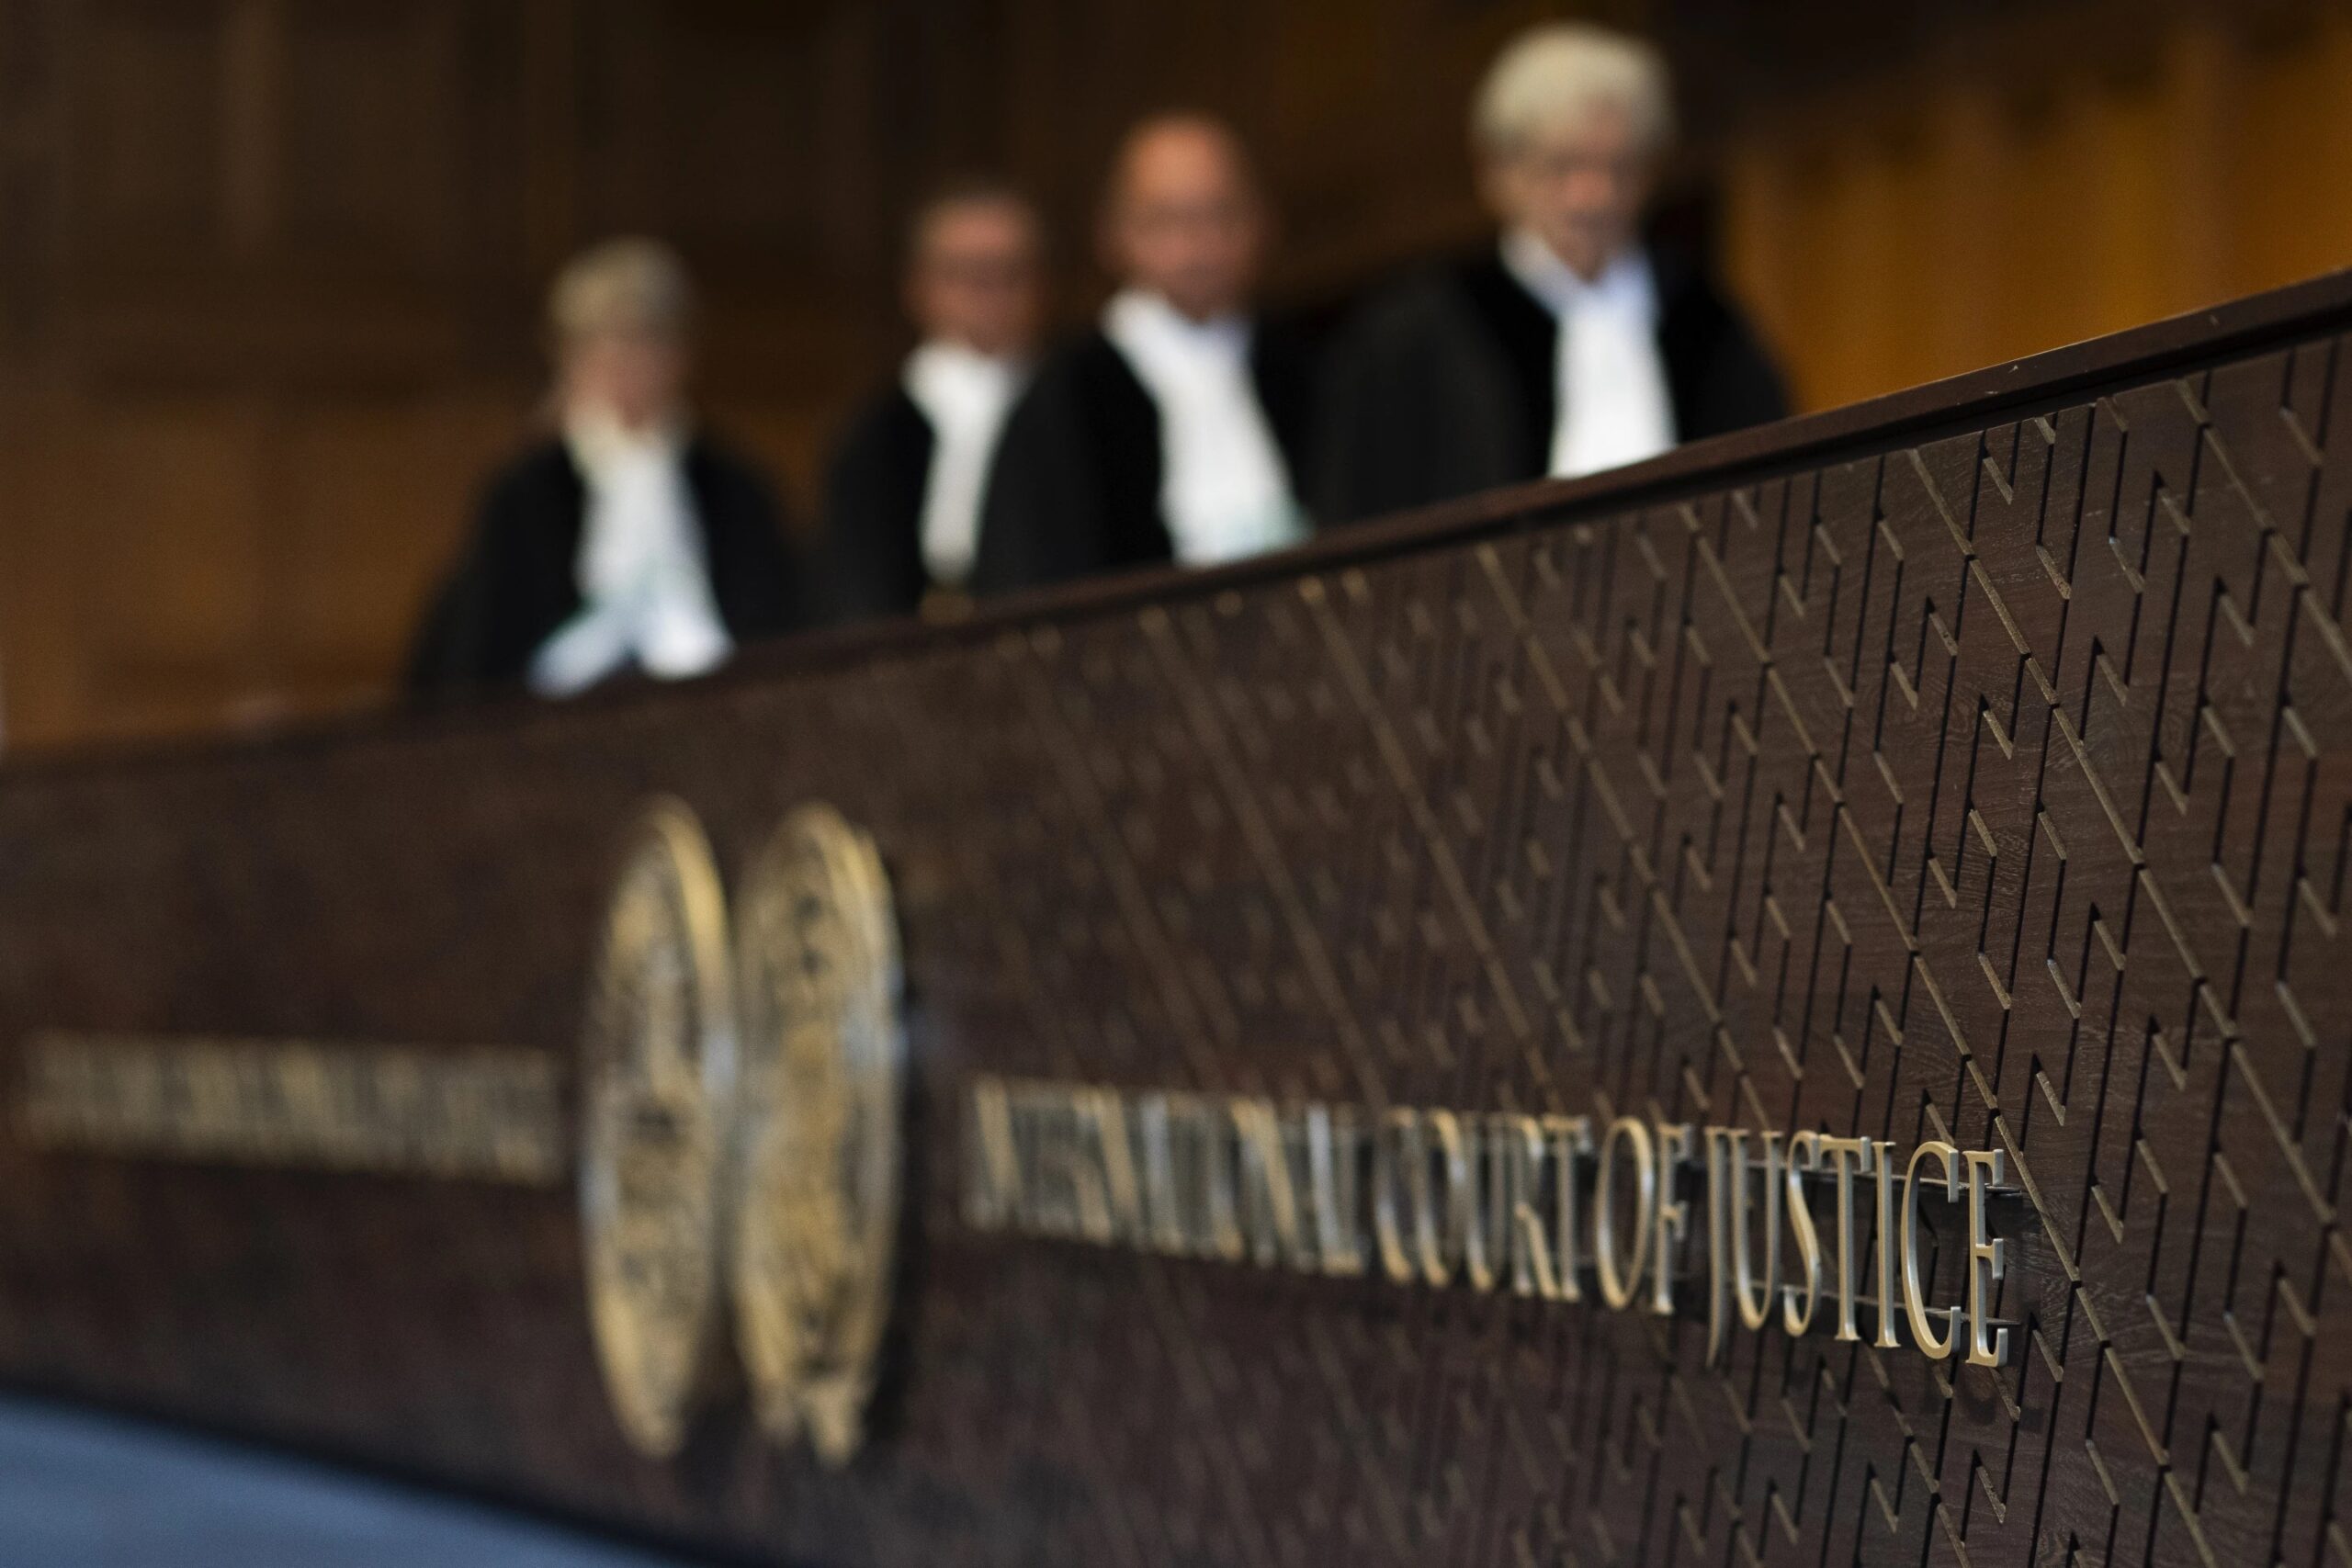 Judges enter the International Court of Justice, in The Hague, Netherlands